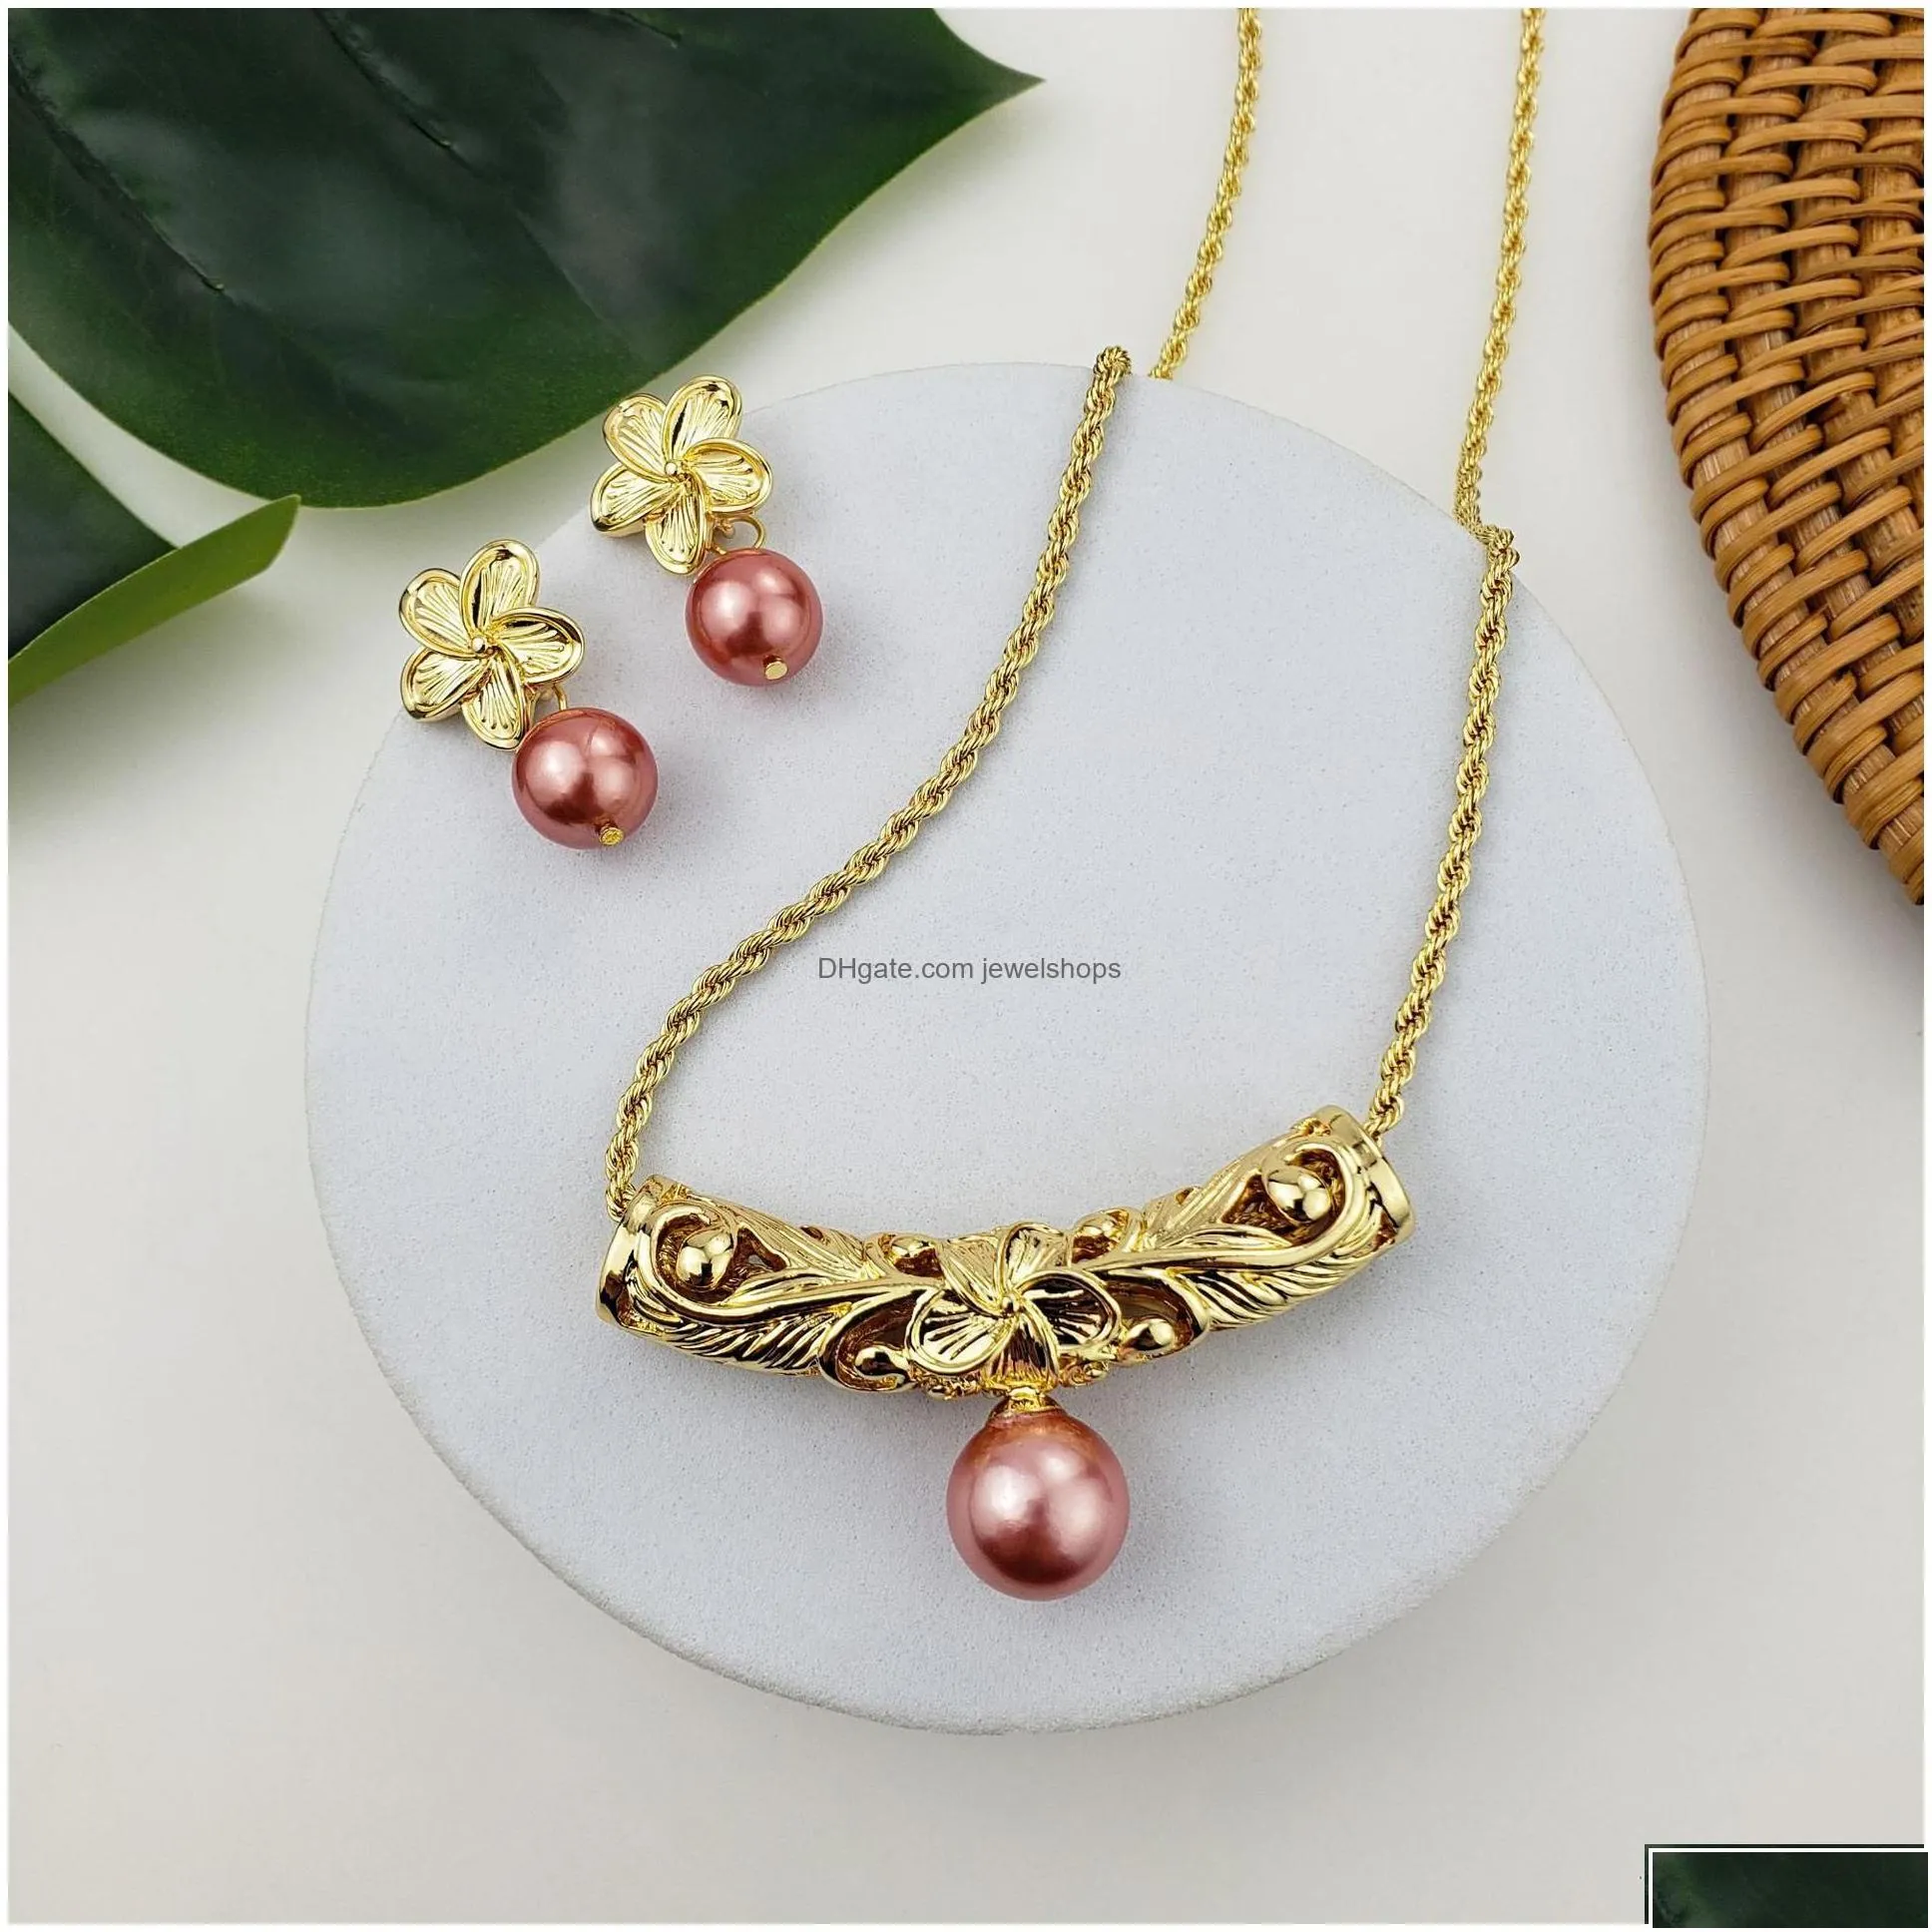 Earrings Necklace Hawaiian Gold Hibiscus Plumeria Flower With Chain Shell Pearl Polynesian Barrel Floral Jewelry Sets For Women Drop